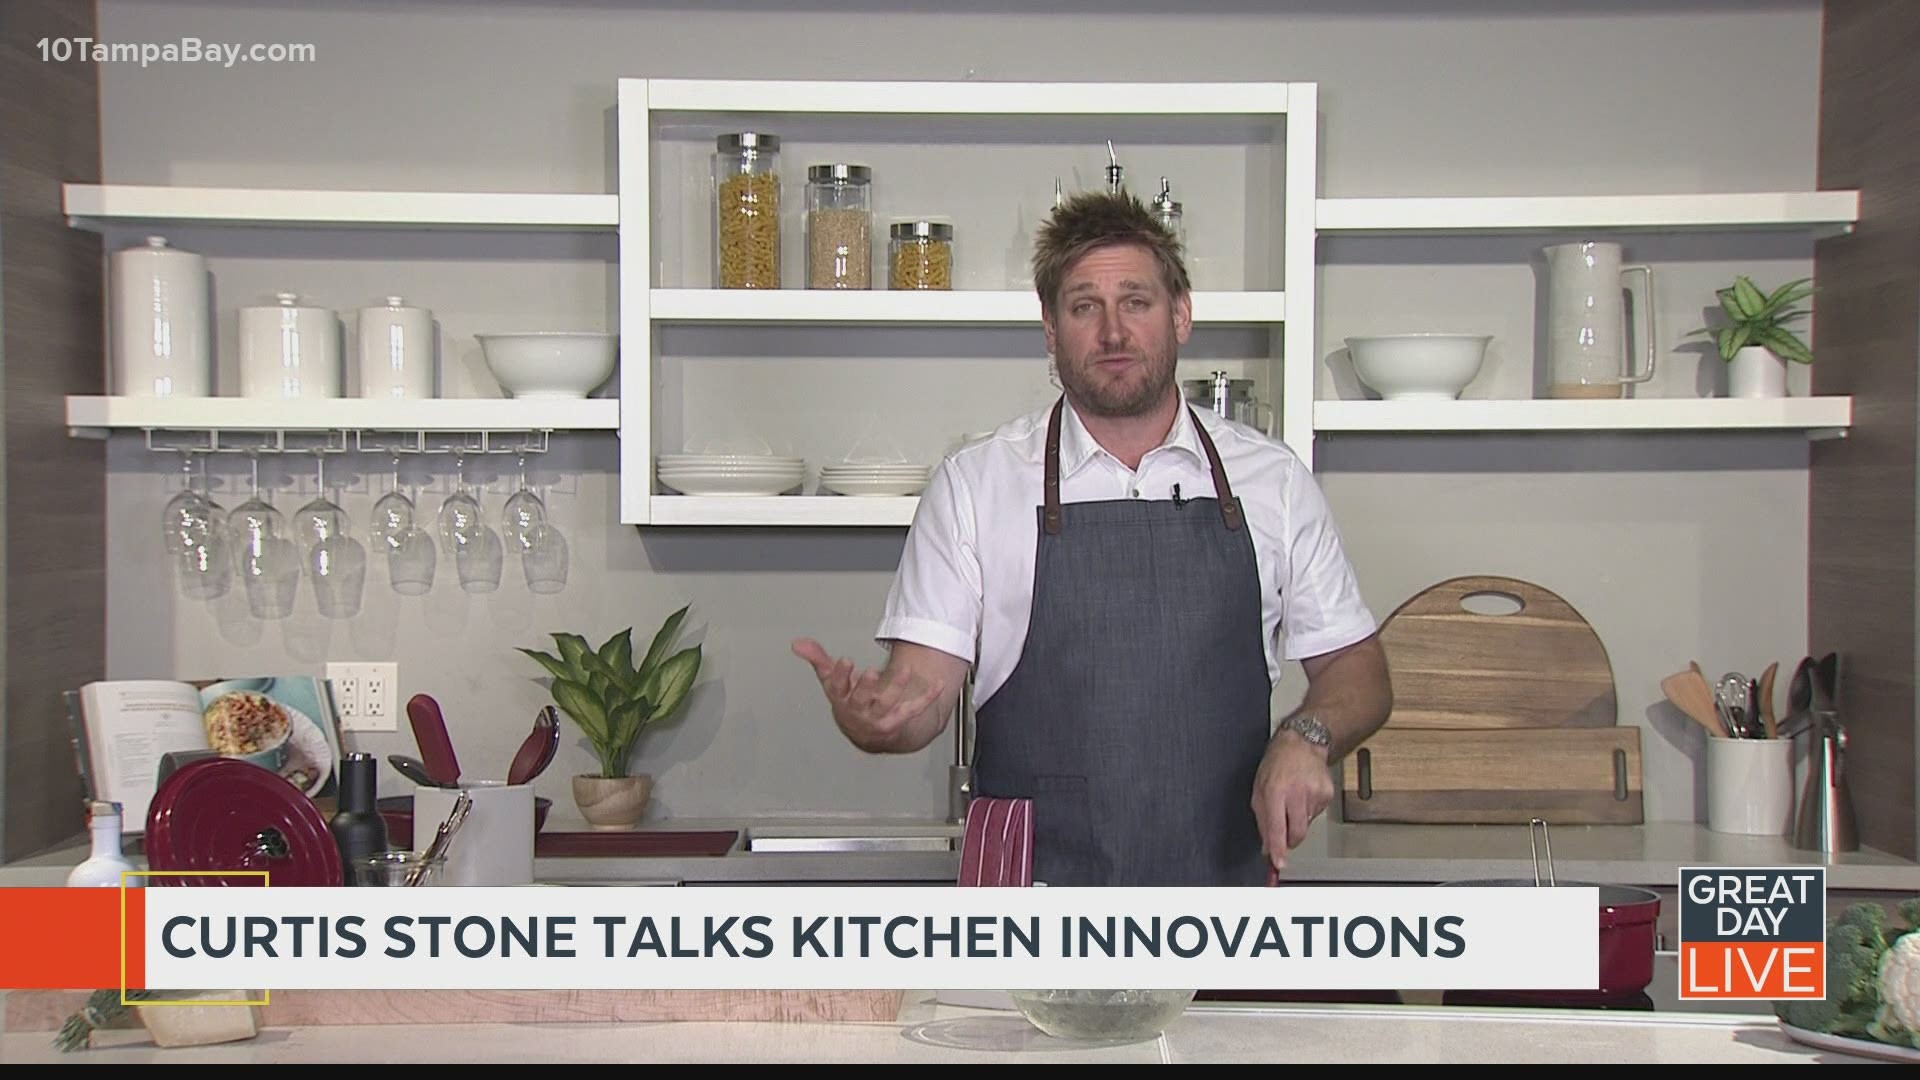 Chef Curtis Stone shares cooking tips